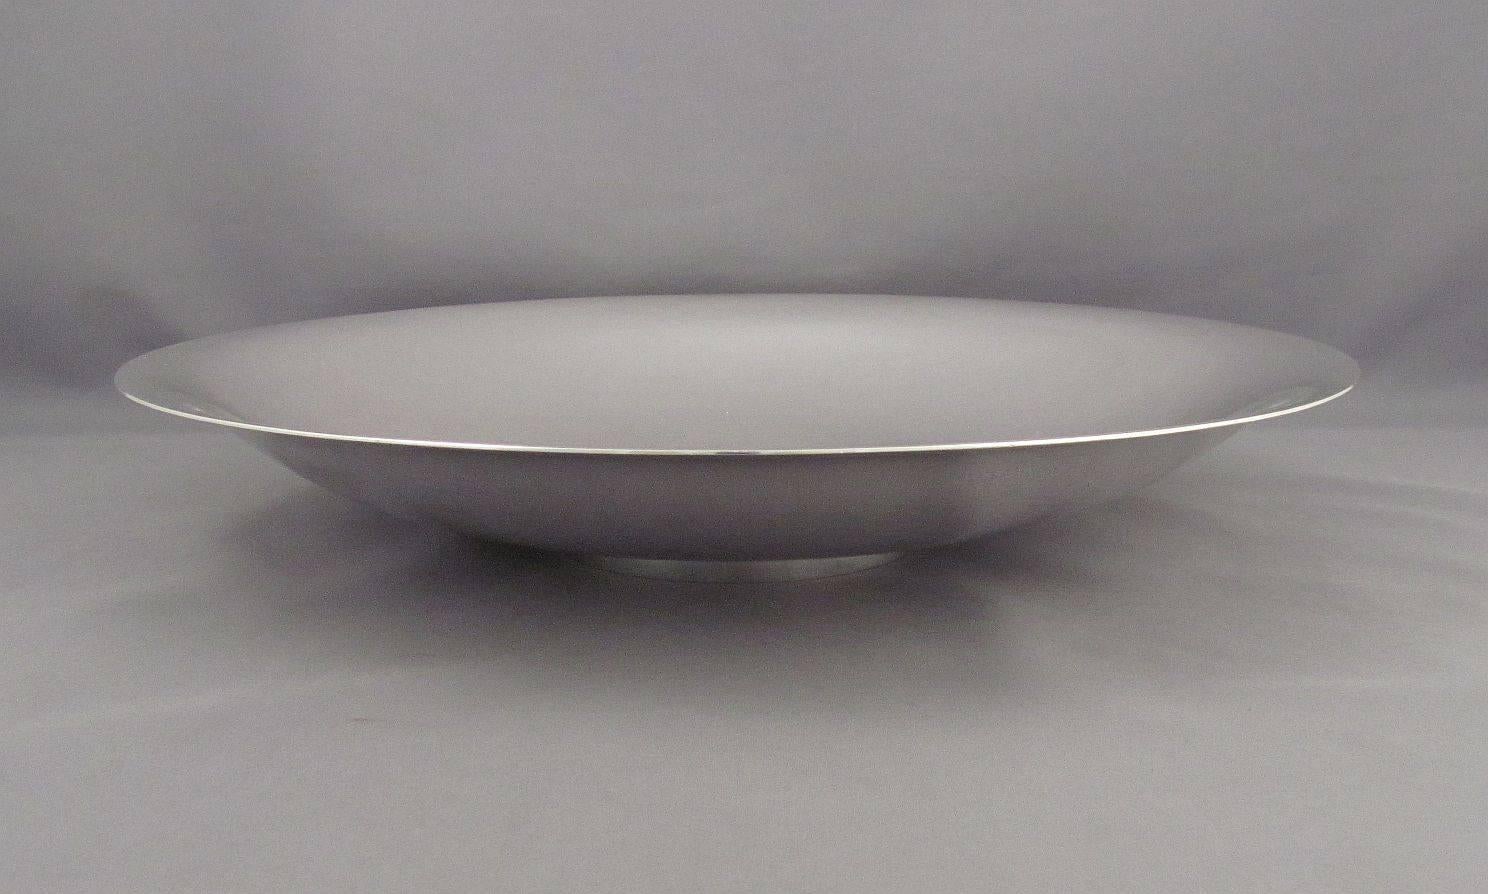 A large sterling silver bowl by Georg Jensen, Copenhagen post 1945, design #620d. Designed by Harald Nielsen, shallow circular form with everted rim on ring foot, subtle hammered finish. Measures: 11 5/8" (29.5cm) diameter, 1 7/8" (5cm)